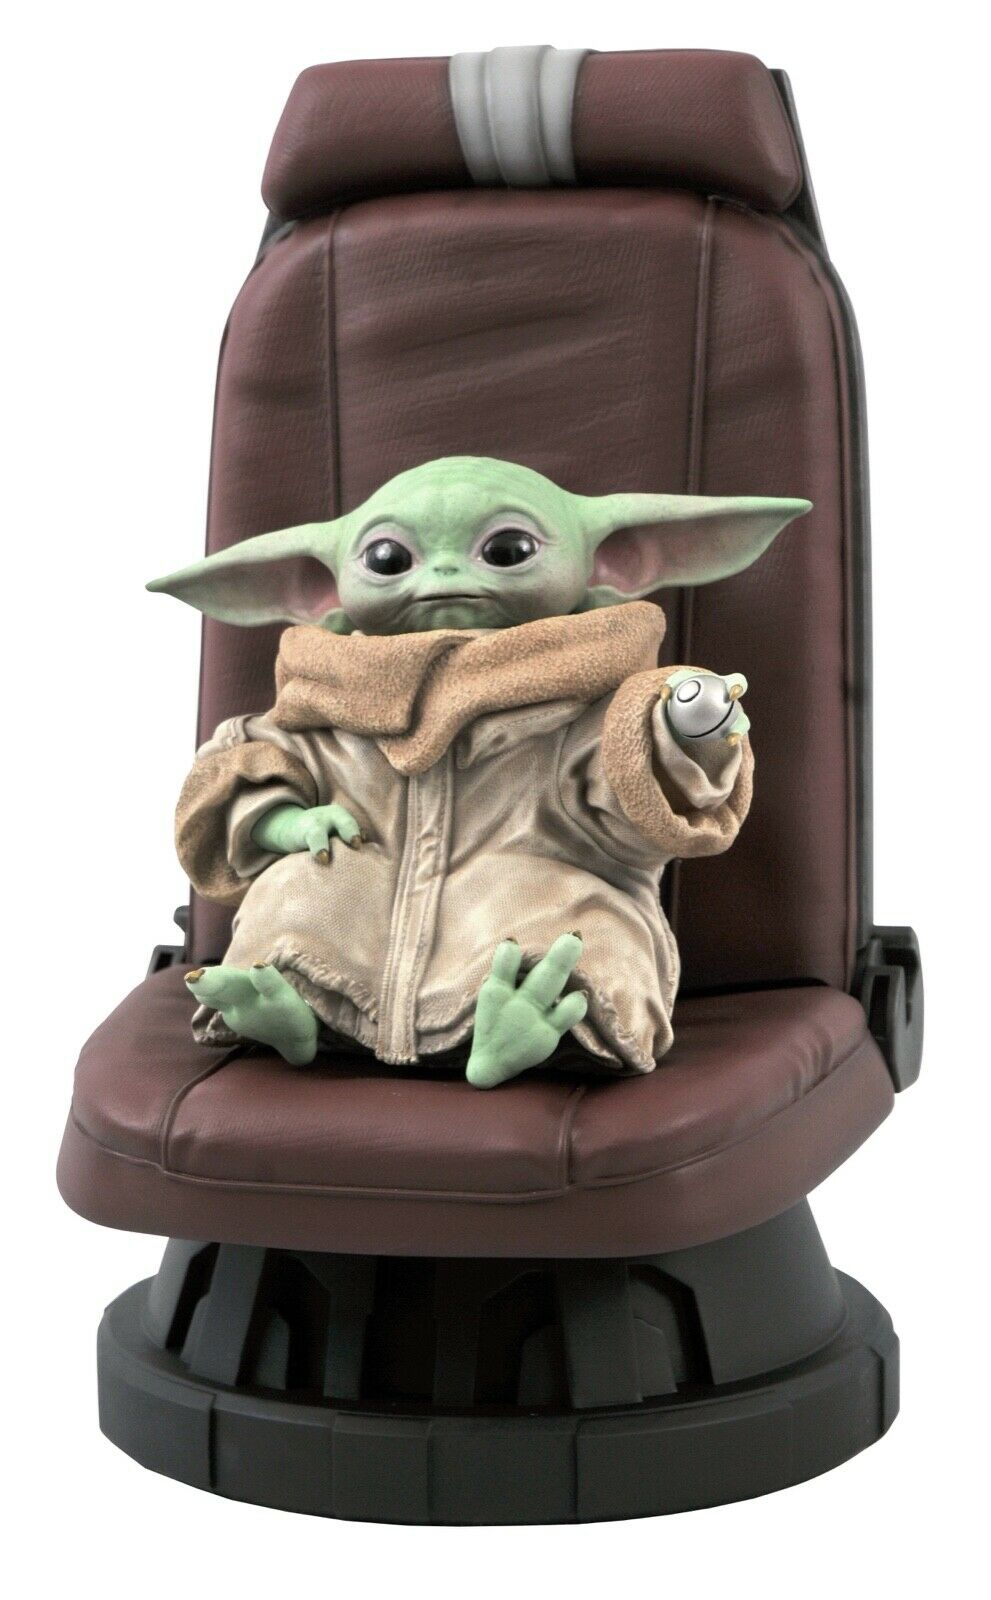 Star Wars The Mandalorian - Grogu The Child in Chair Statue By Gentle Giant - Limited Edition 5,000